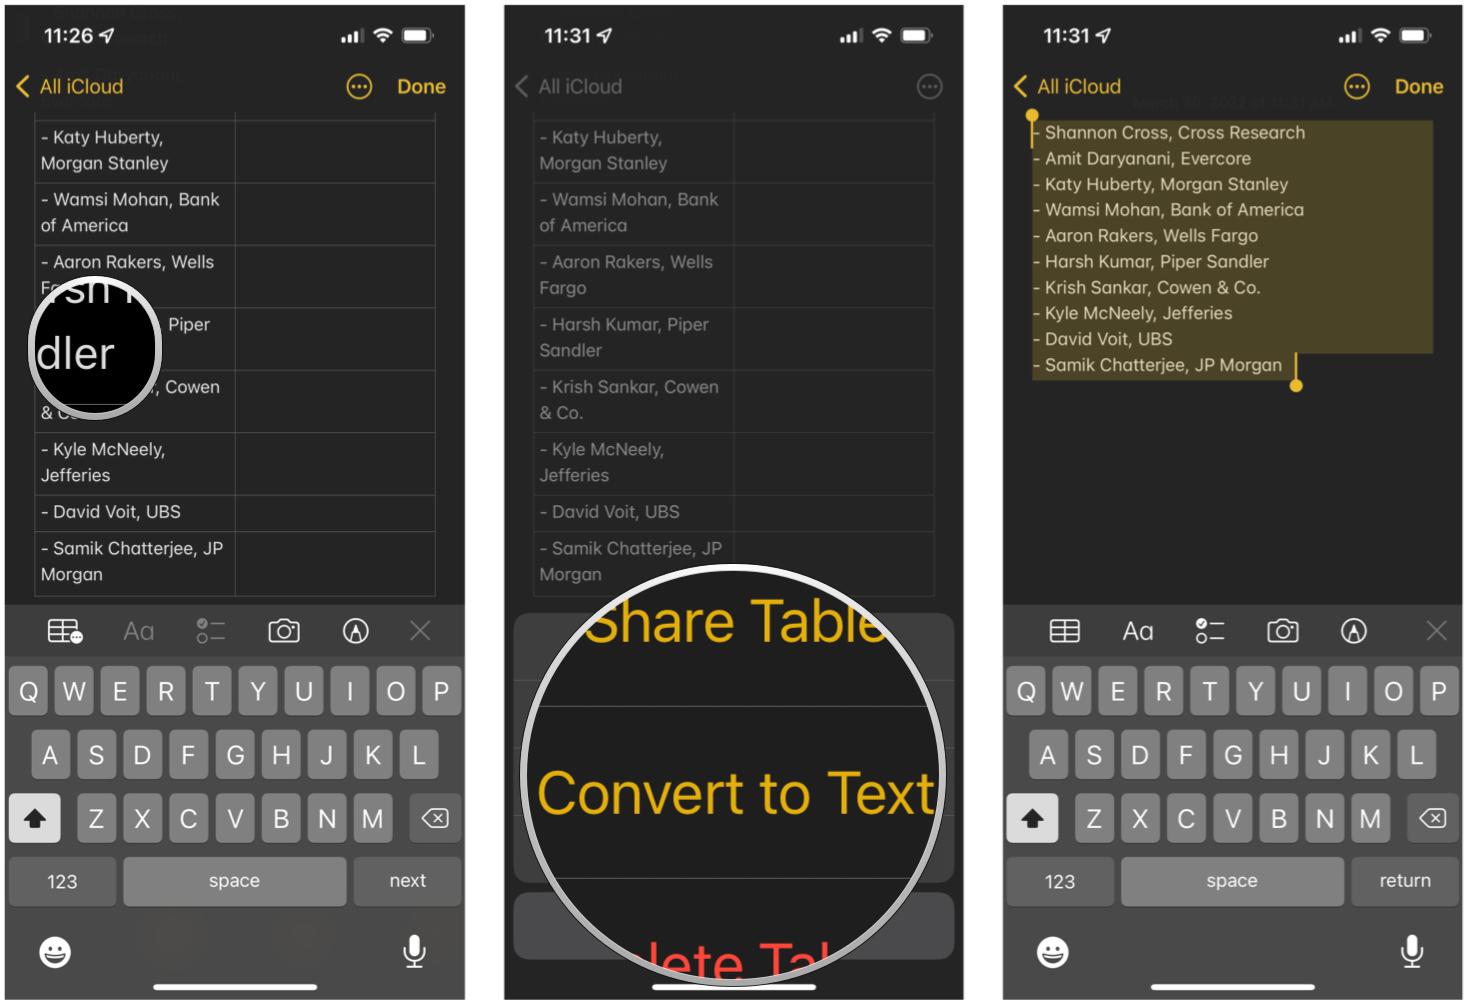 Convert table to plain text in Notes on iPhone: Launch Notes, tap note with table, tap in the table, tap the Table button, select Convert to Text